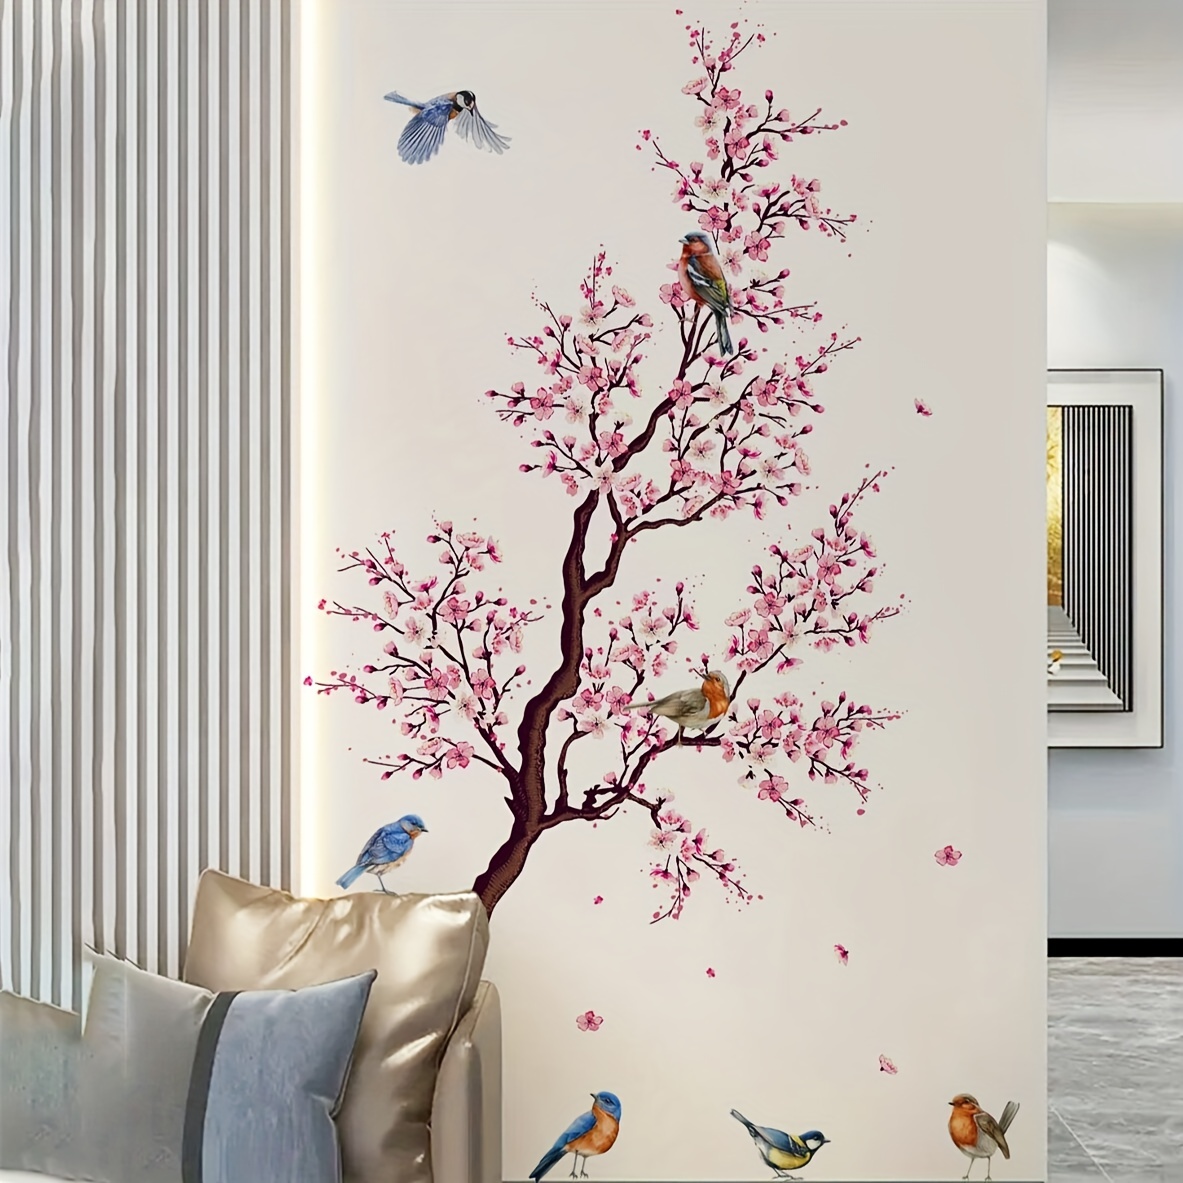 Yoga Theme Wall Stickers Just Breathe Wall Decal Butterfly Dandelion Wall  Art Inspirational Quotes Self-adsive Wallpaper for Yoga Room Bedroom  Decorations 